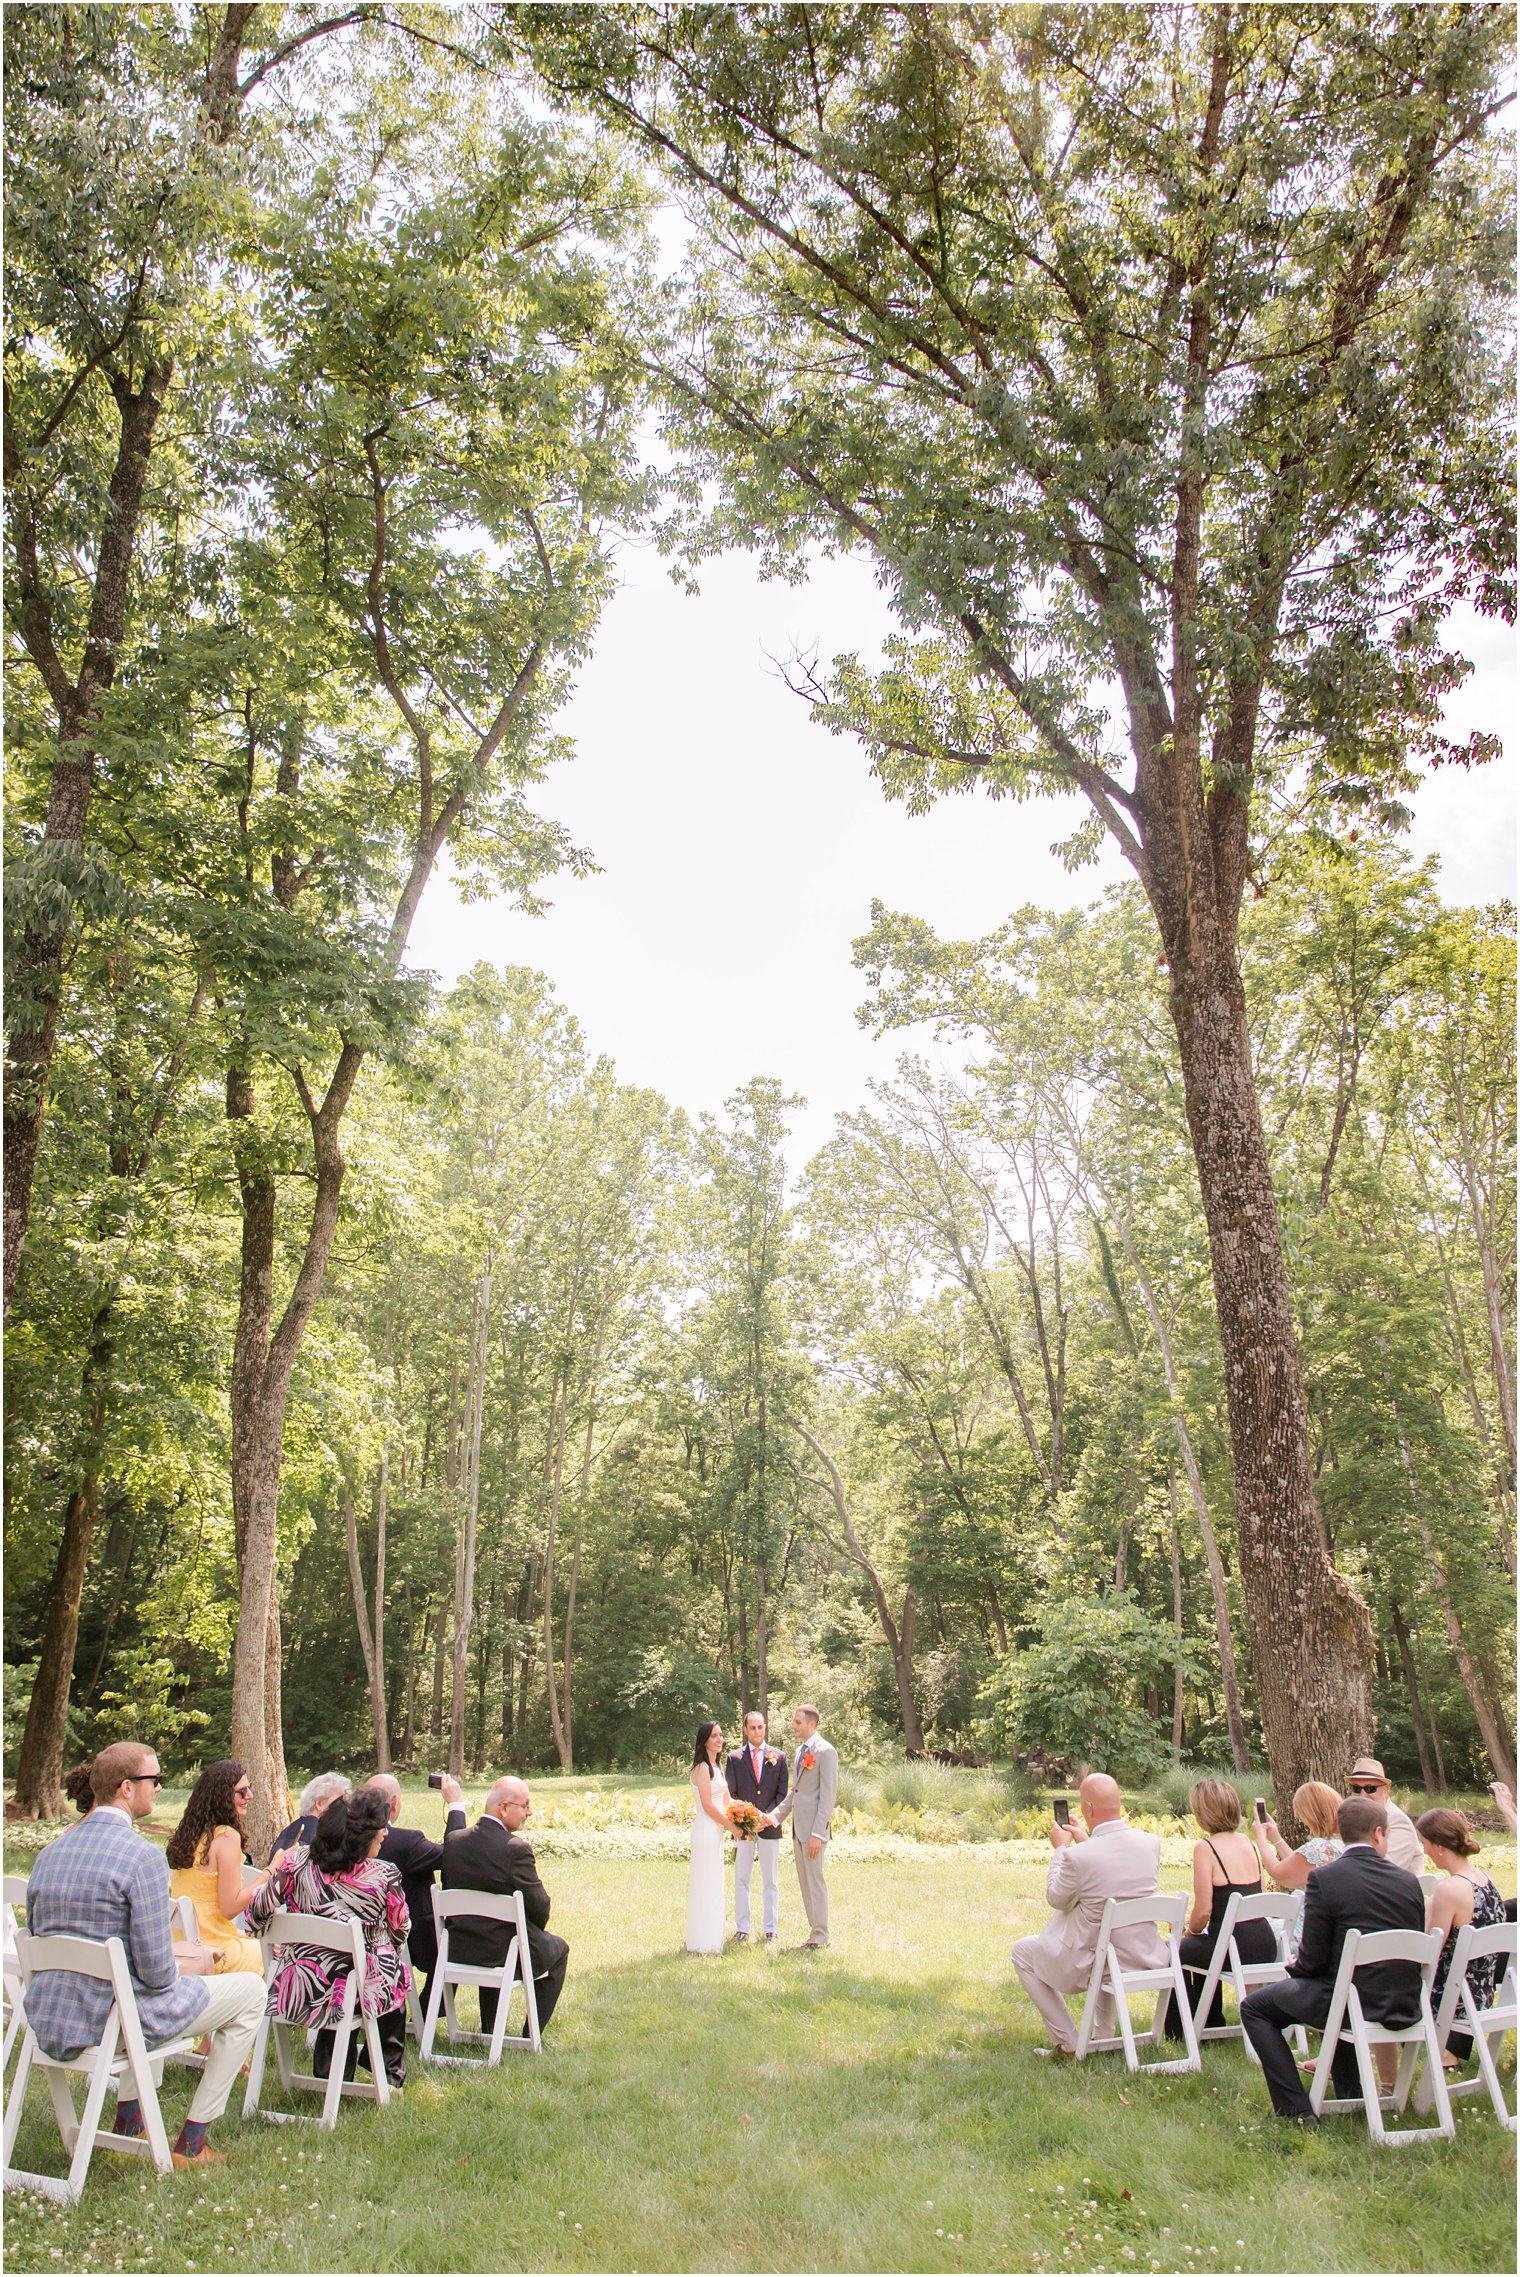 Intimate wedding ceremony under tree canopy in New Hope PA